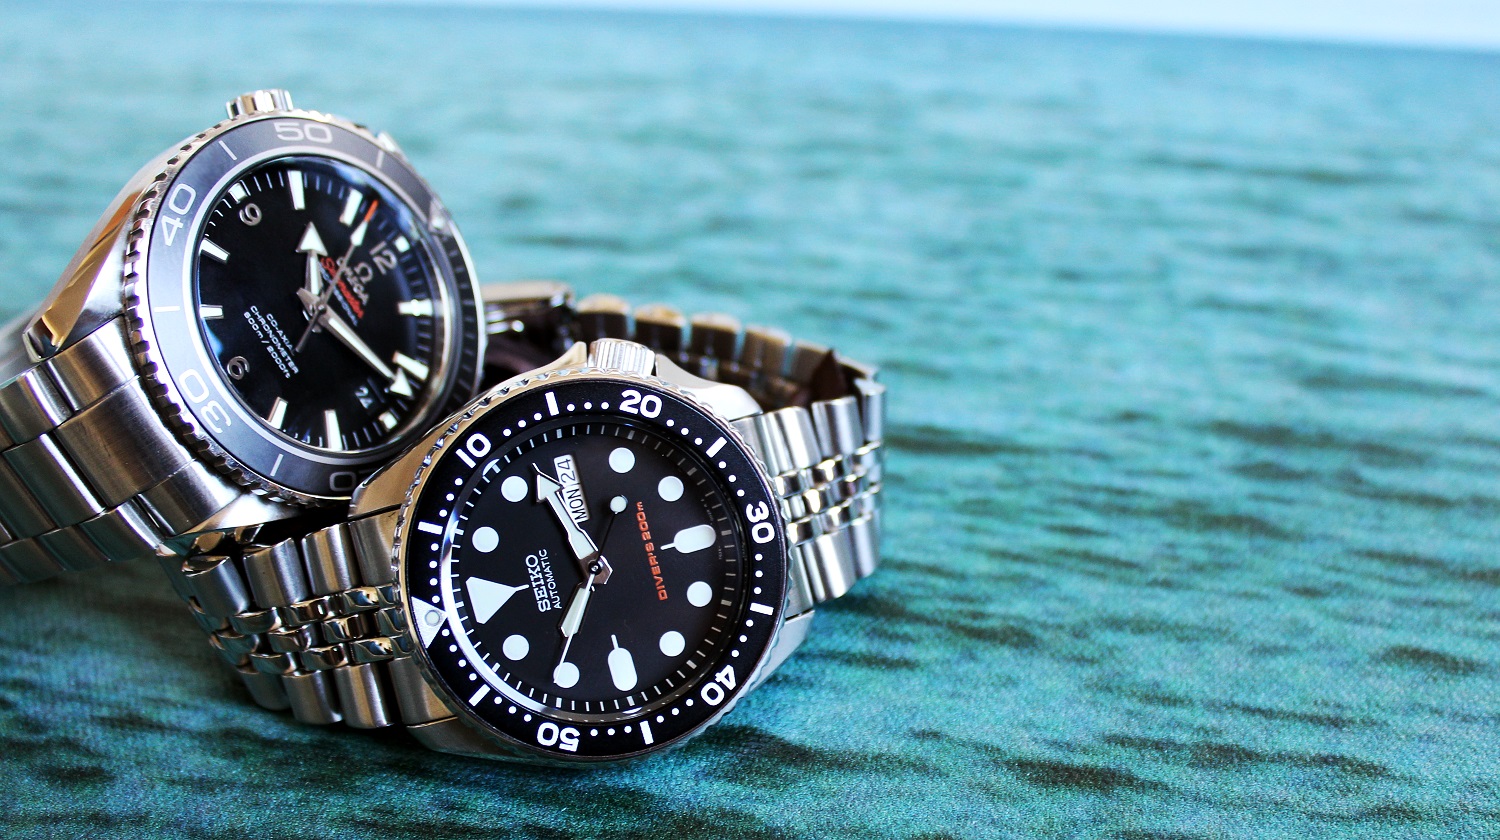 The Best Dive Watches by Budget